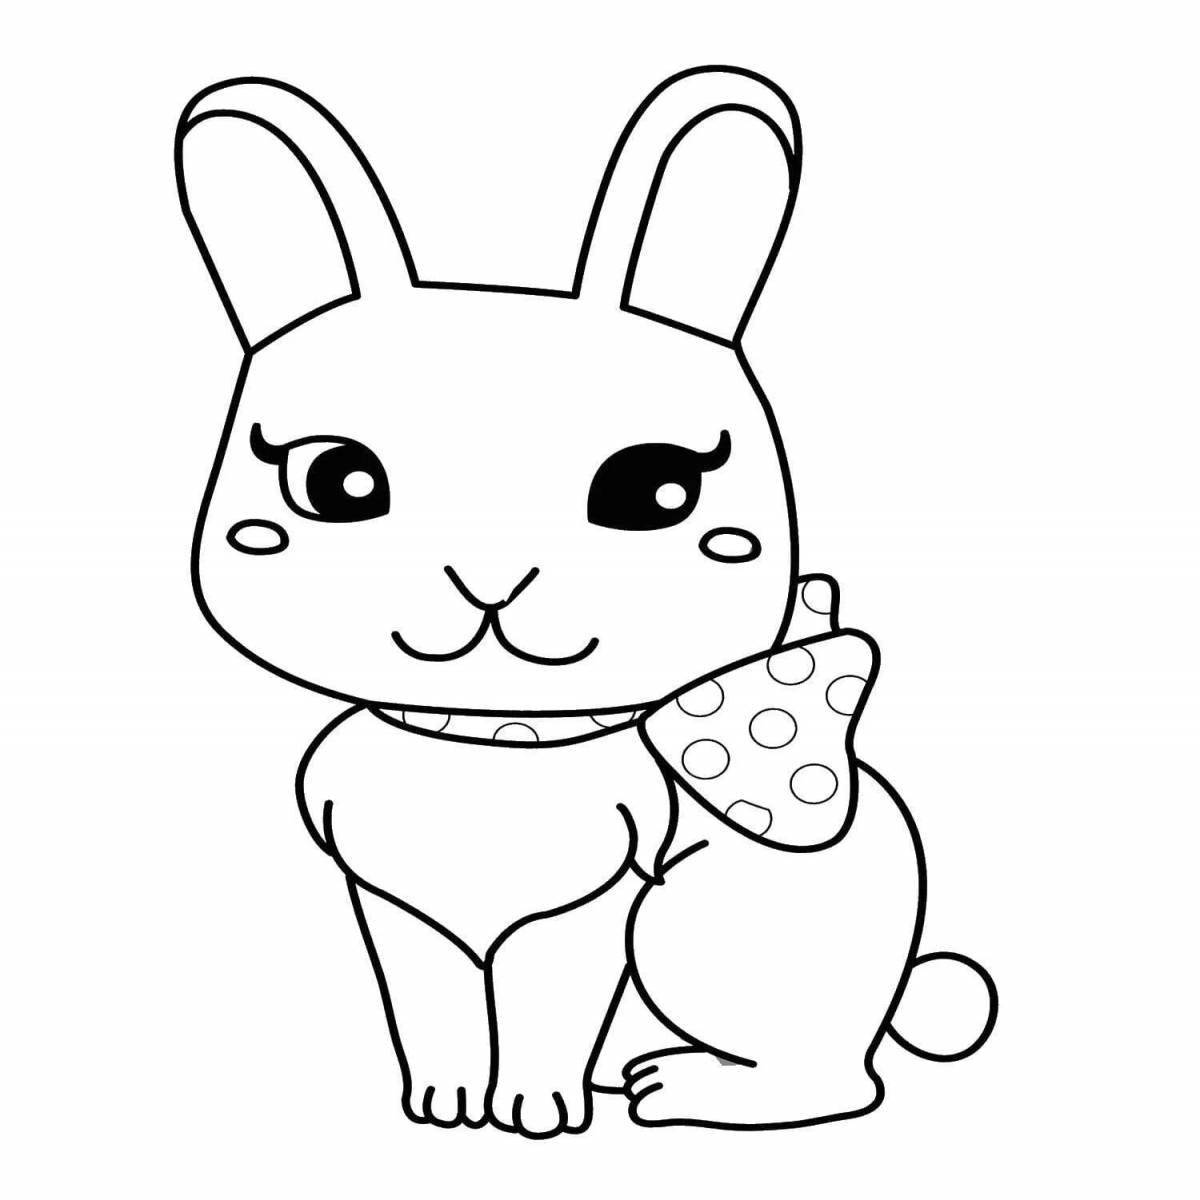 Adorable rabbit and cat coloring book